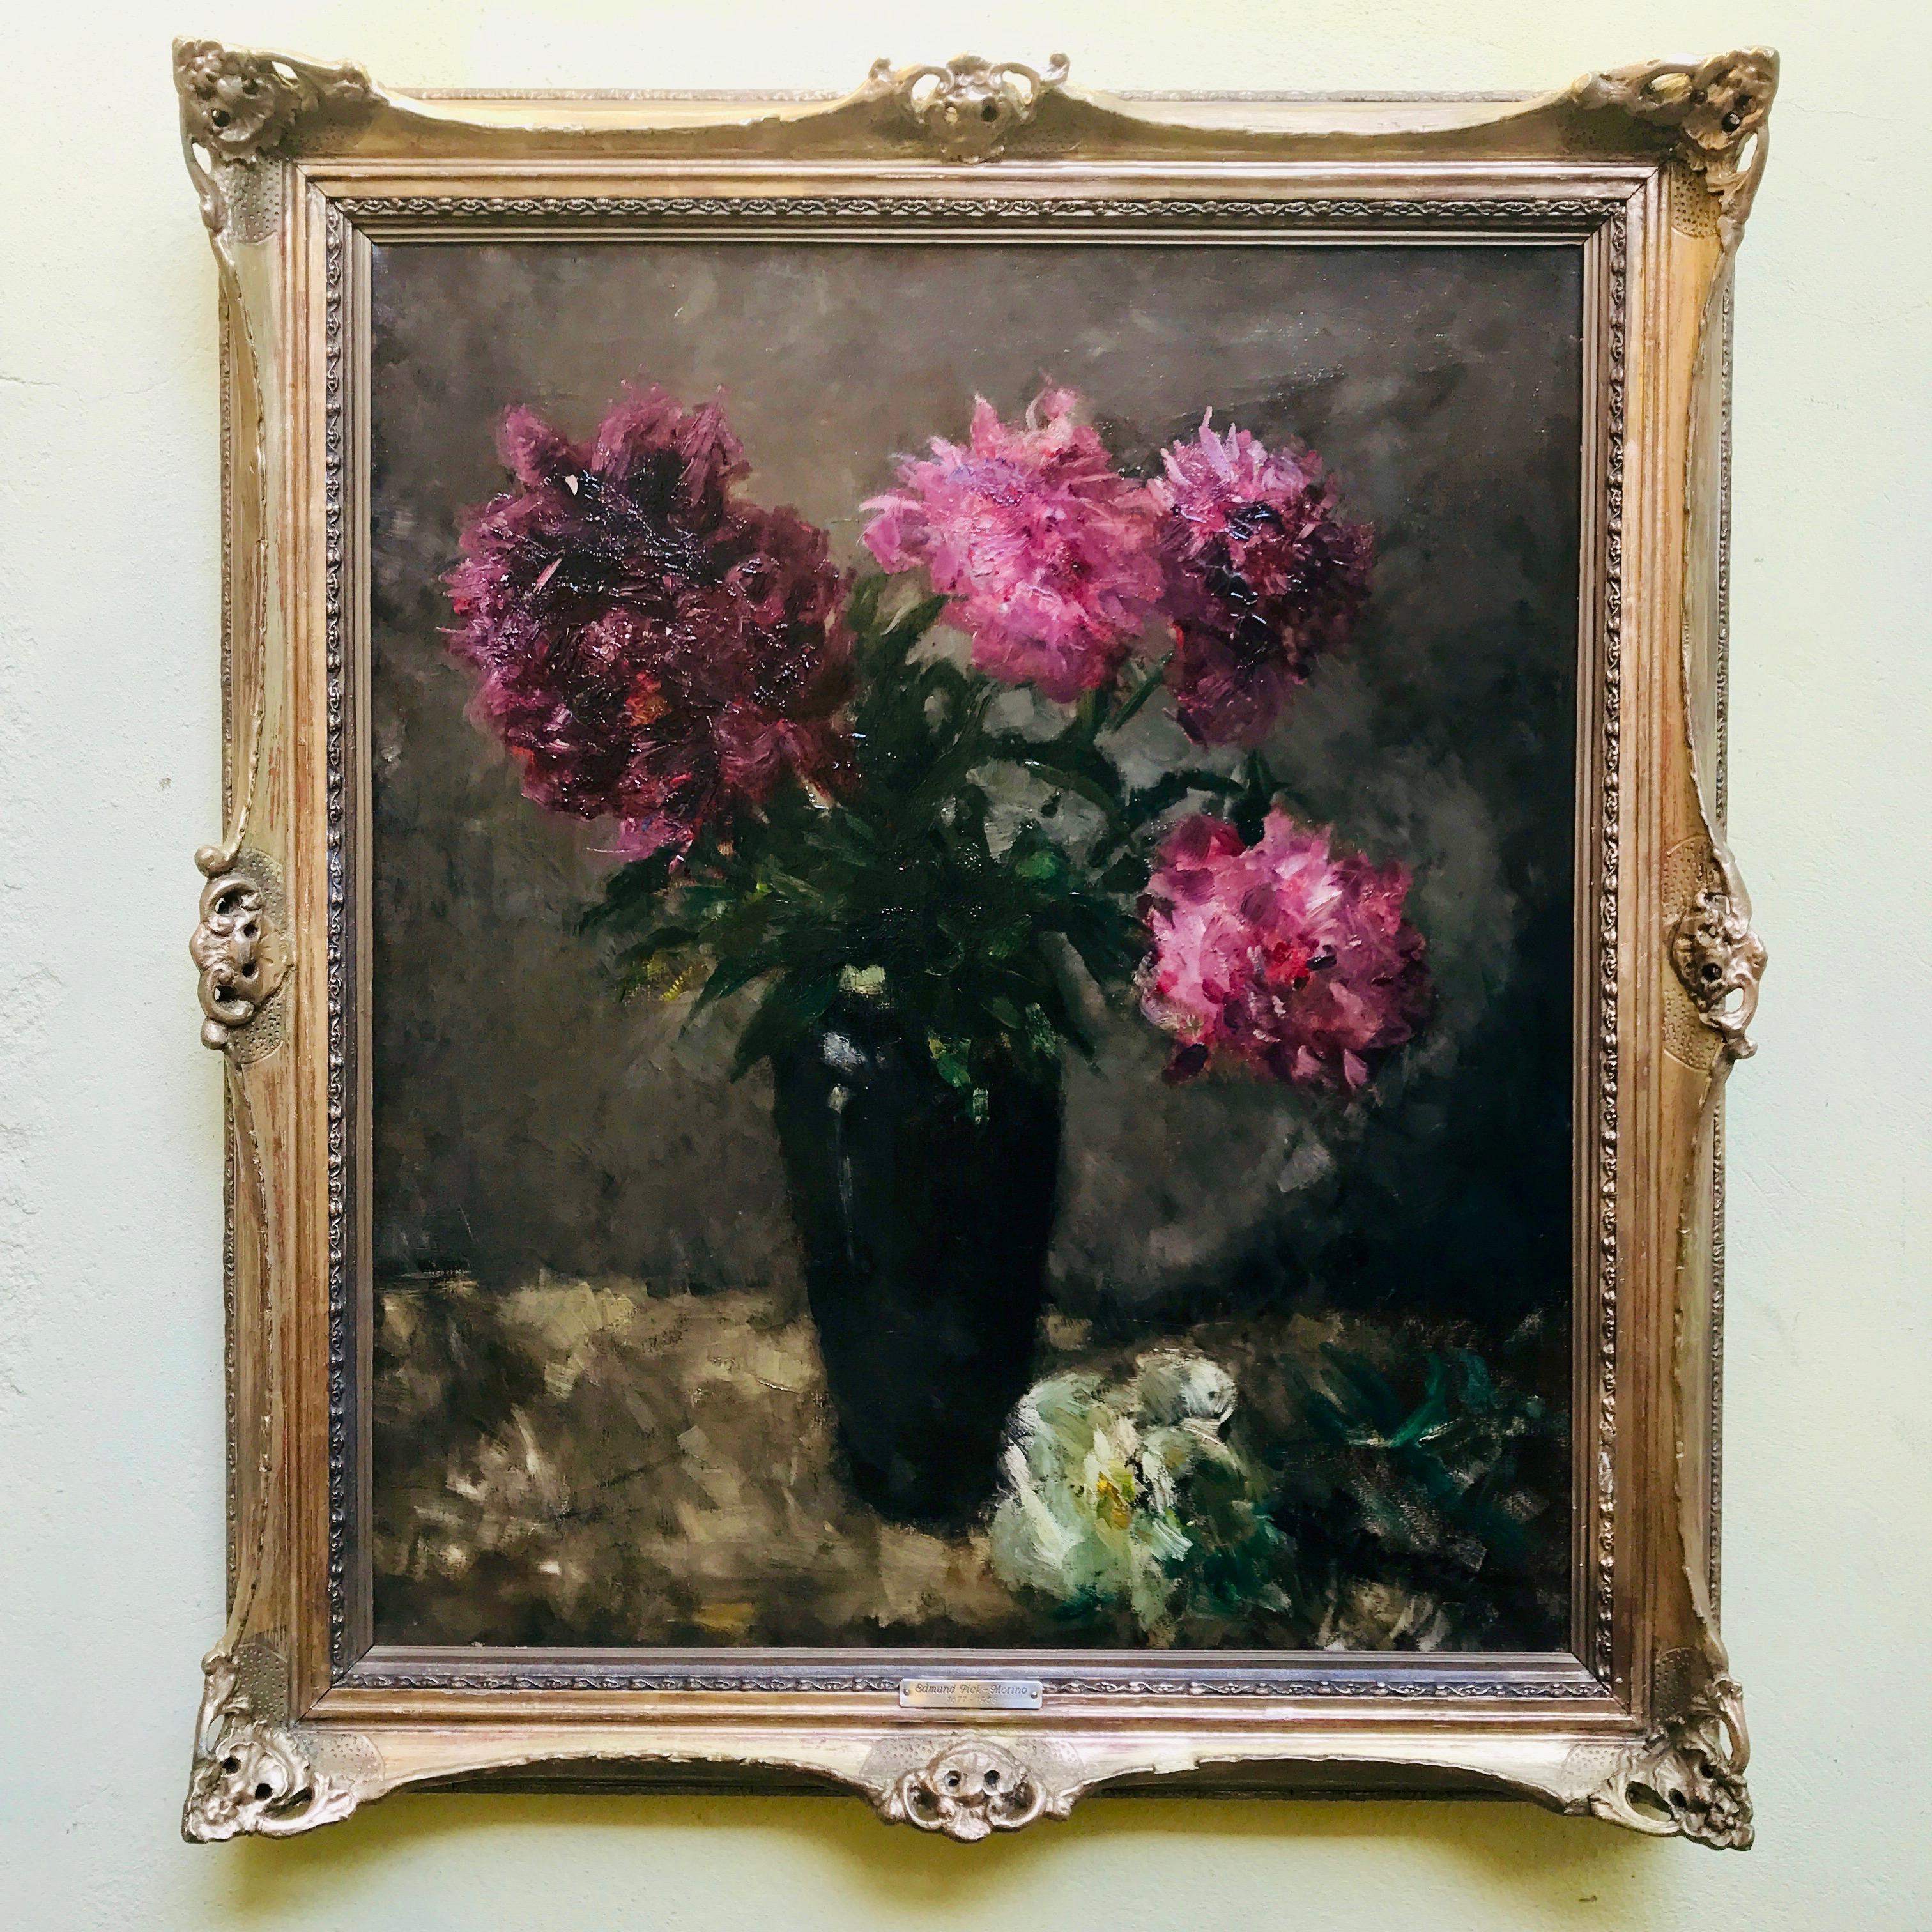 Edmund Pick-Morino still life of flowers, an oil on canvas painting signed lower right by the Austro Hungarian painter Edmund Pick-Morino (Vienna 1877-1958 Brussels).

A very decorative and bright flowers painting of polychrome peonies, rose and red